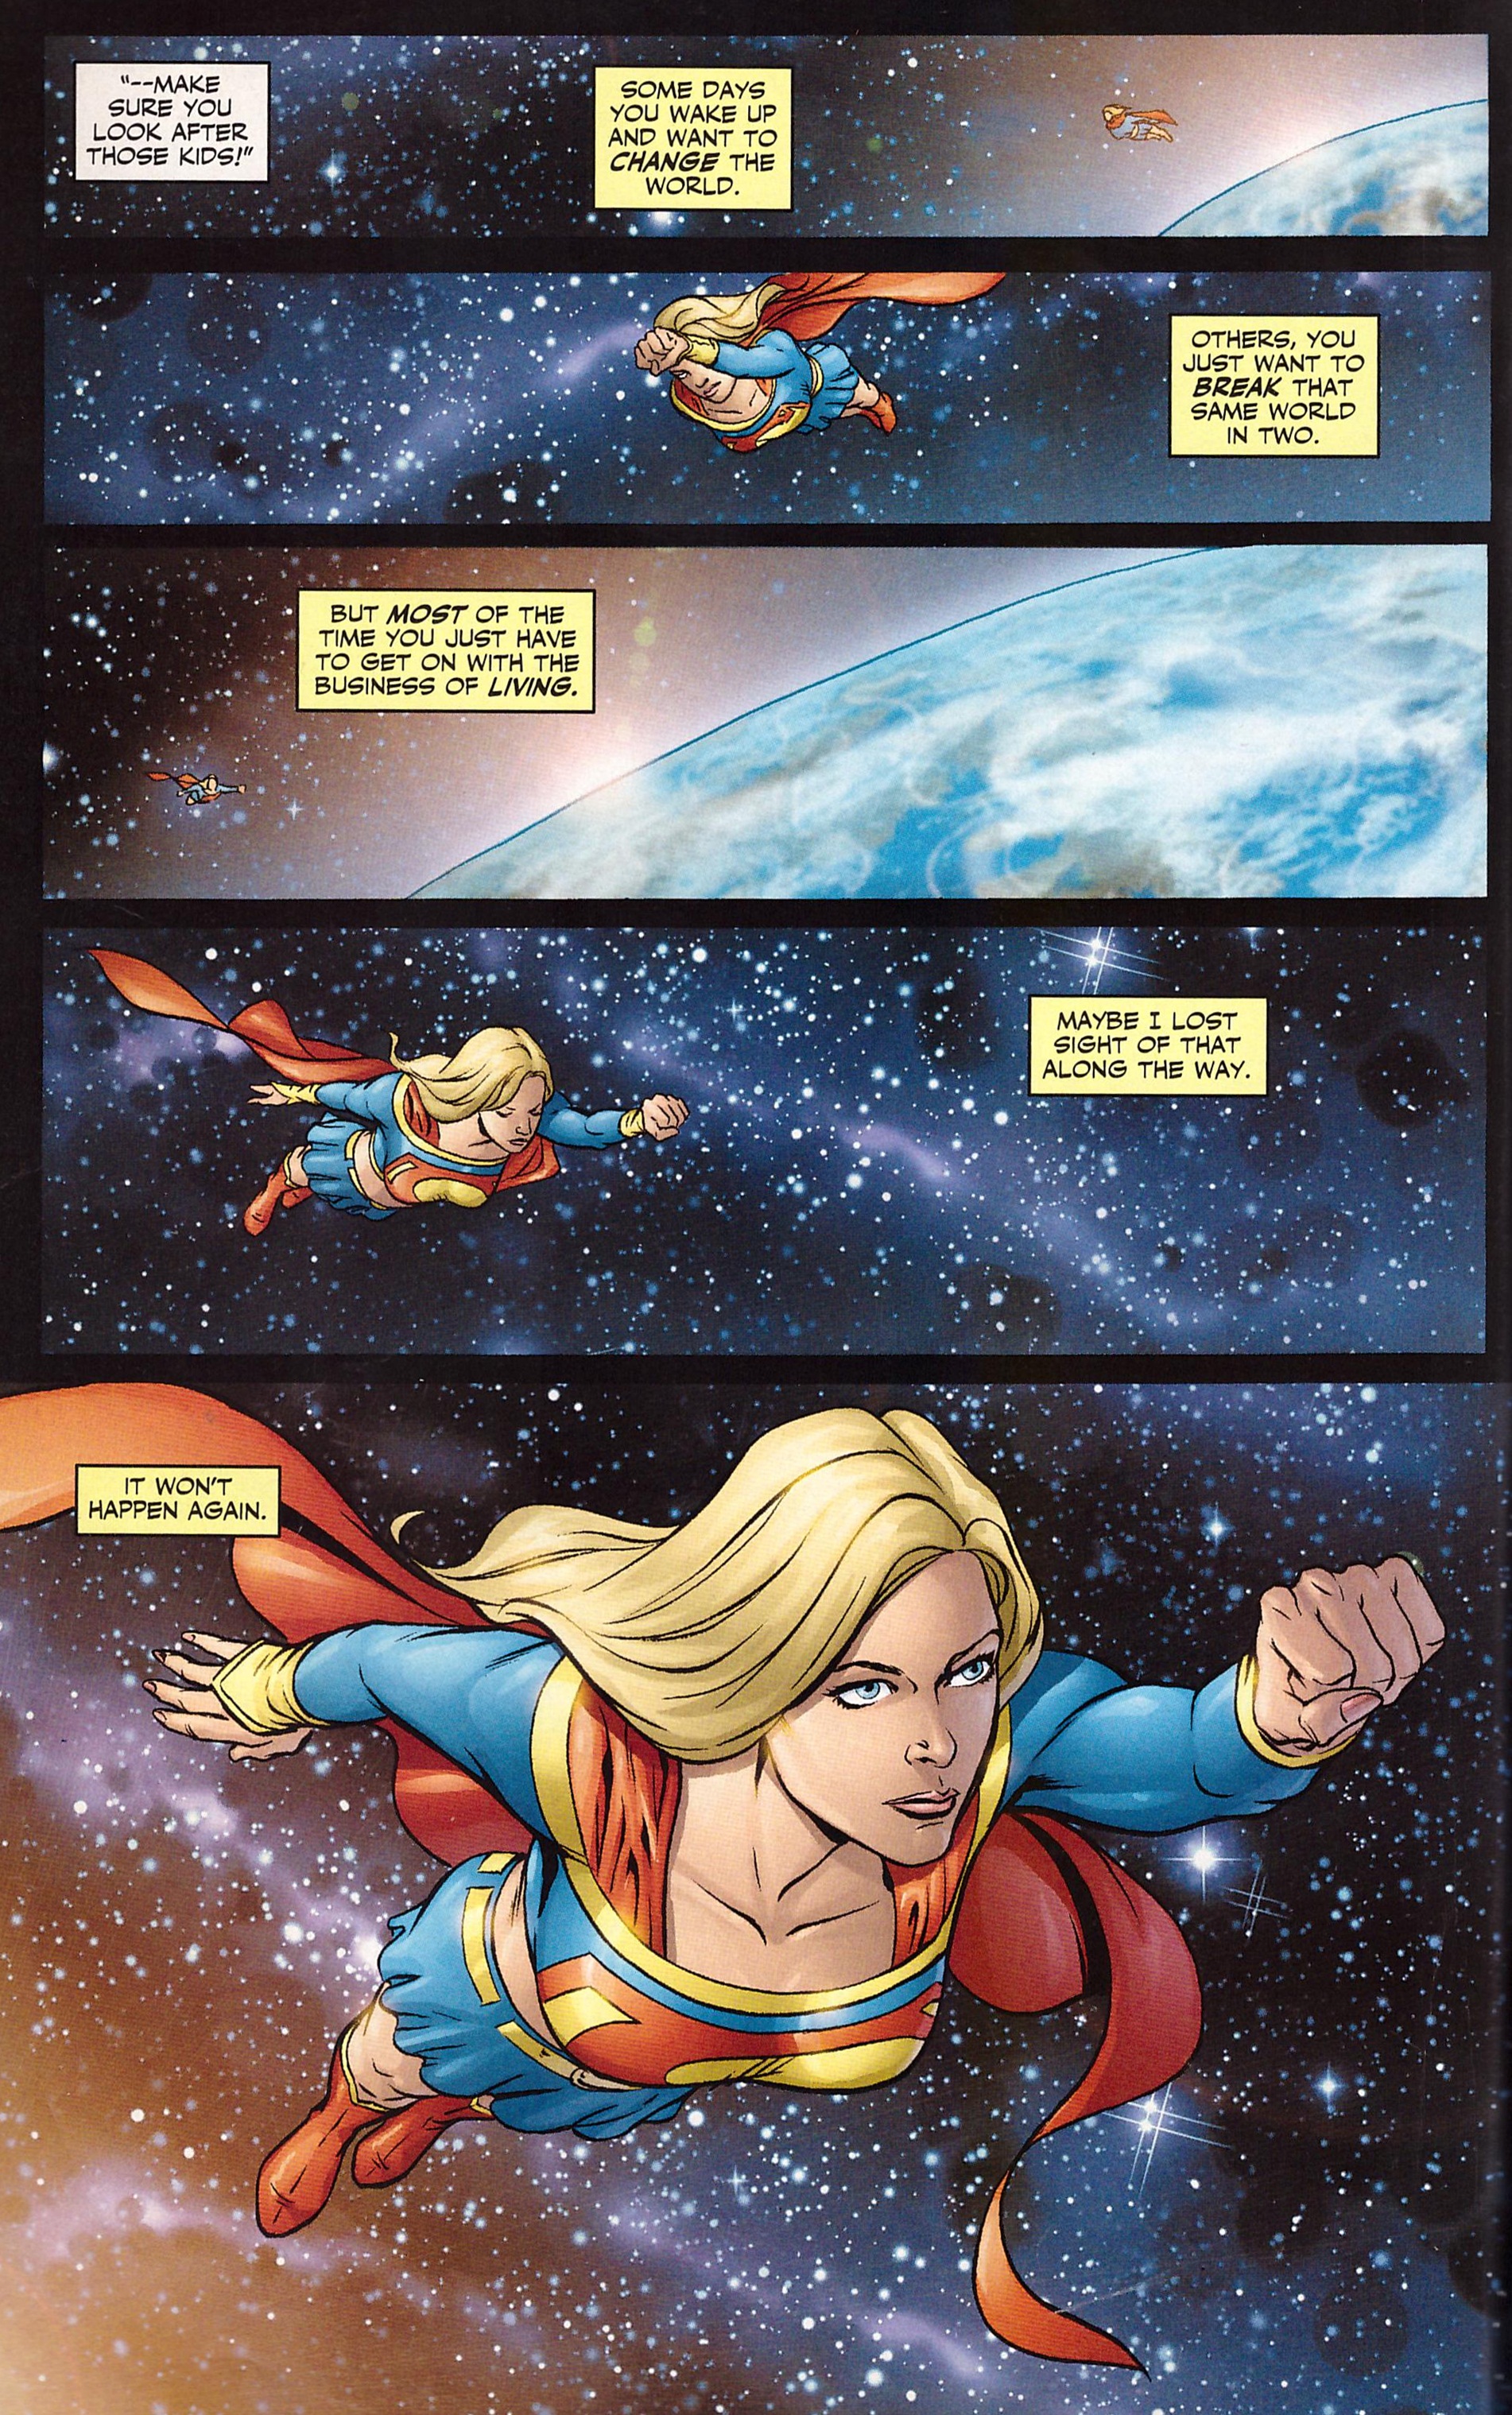 Supergirl Way of the World review